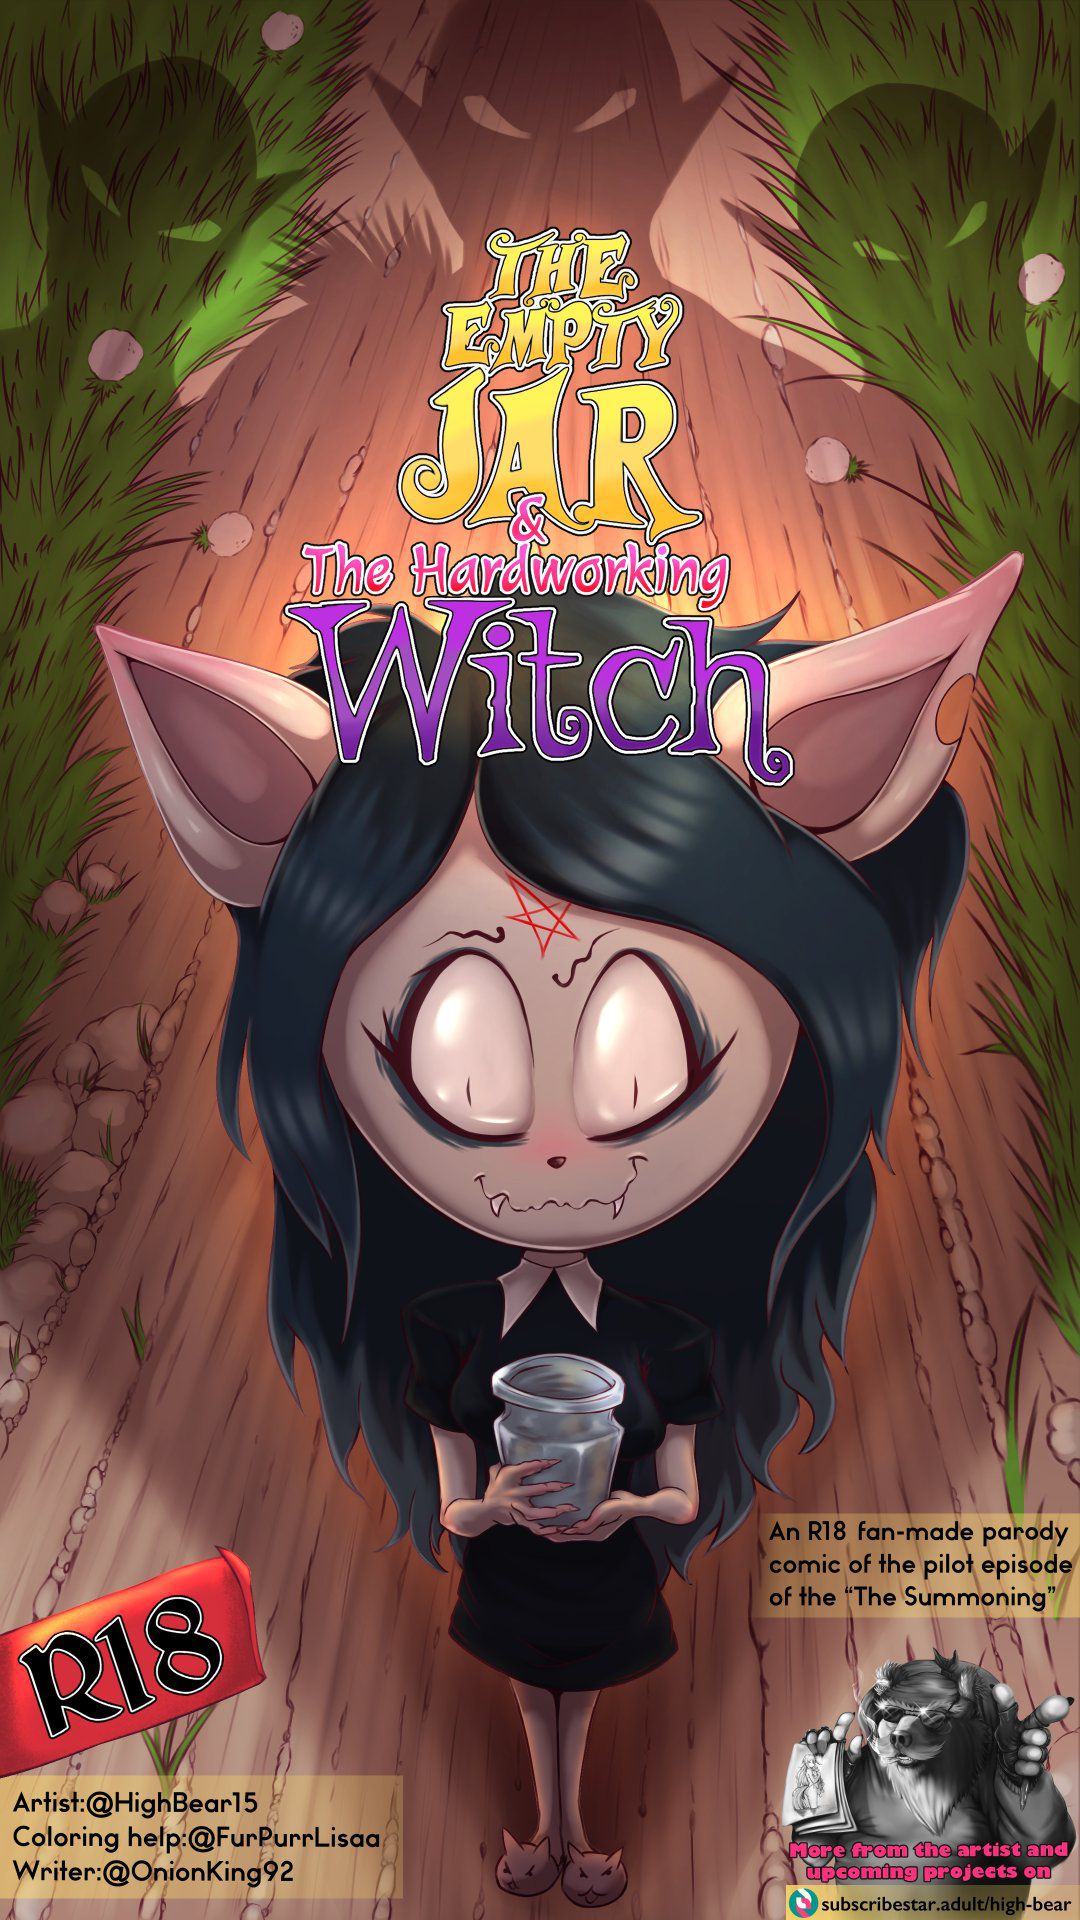 [HighBear15] The Empty Jar And The Hardworking Witch (The Summoning) (Ongoing) 1